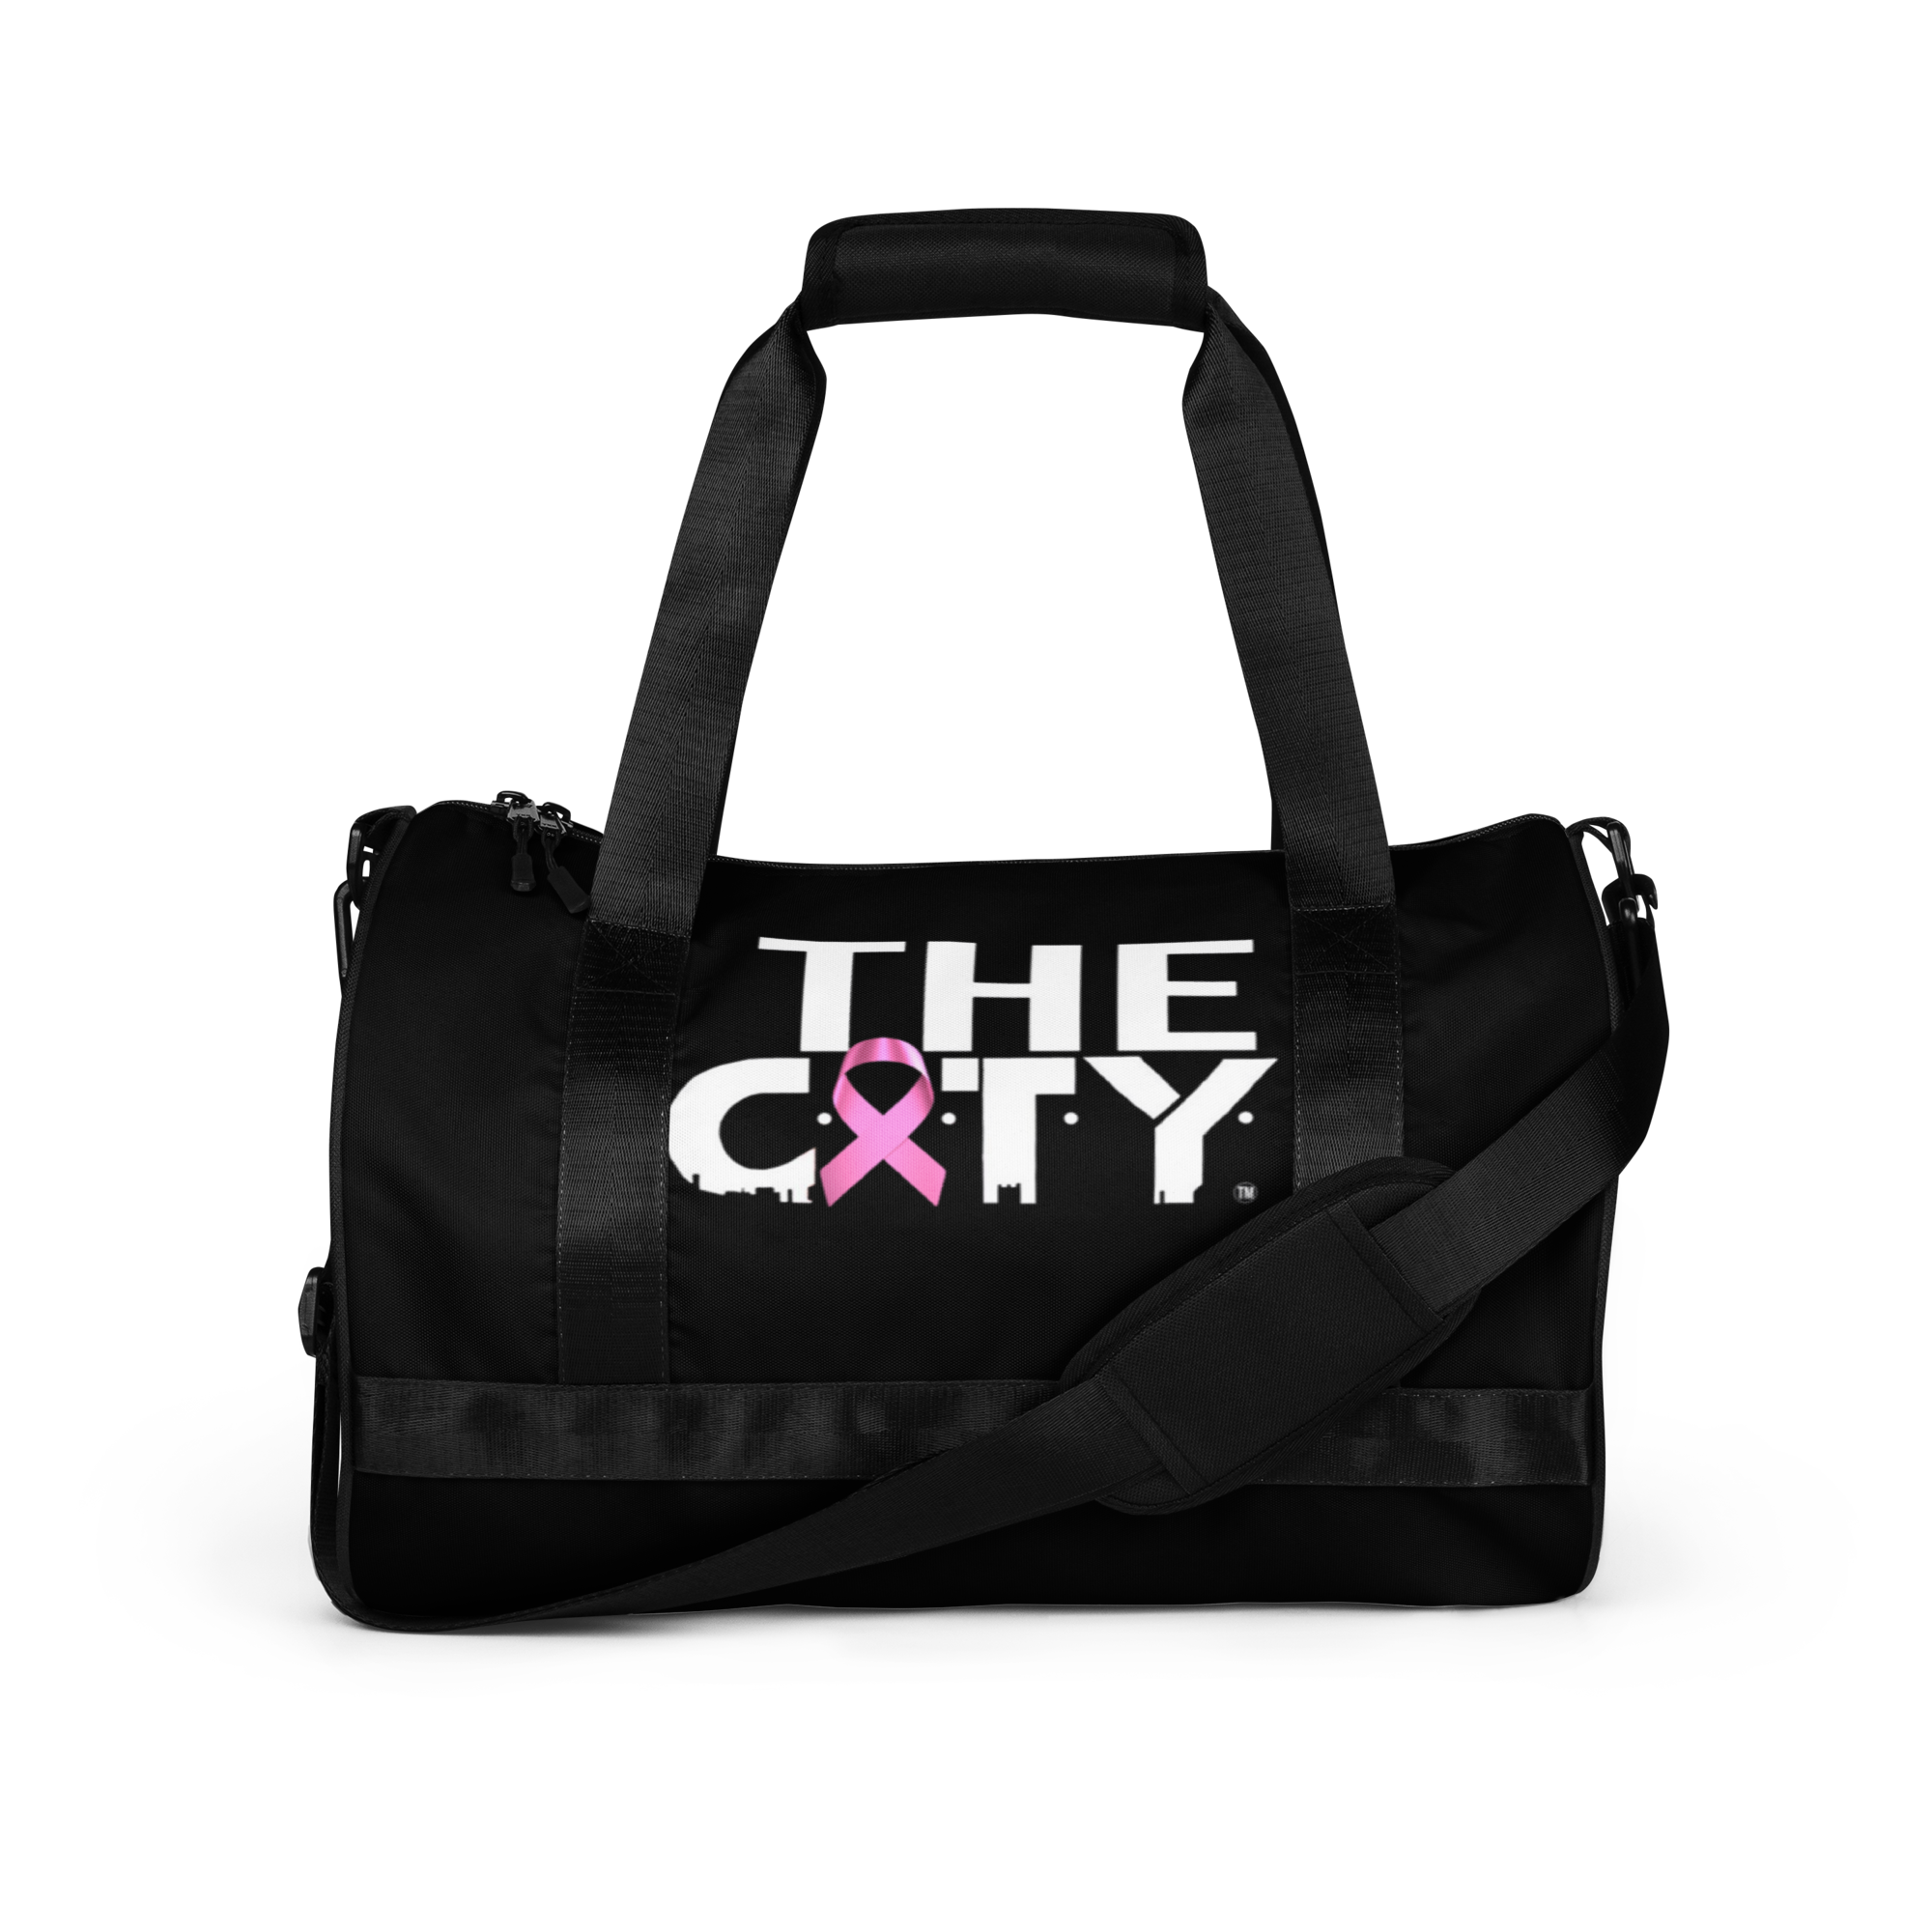 THE C.I.T.Y. Breast Cancer Awareness Embroidery BLK All-over print gym bag